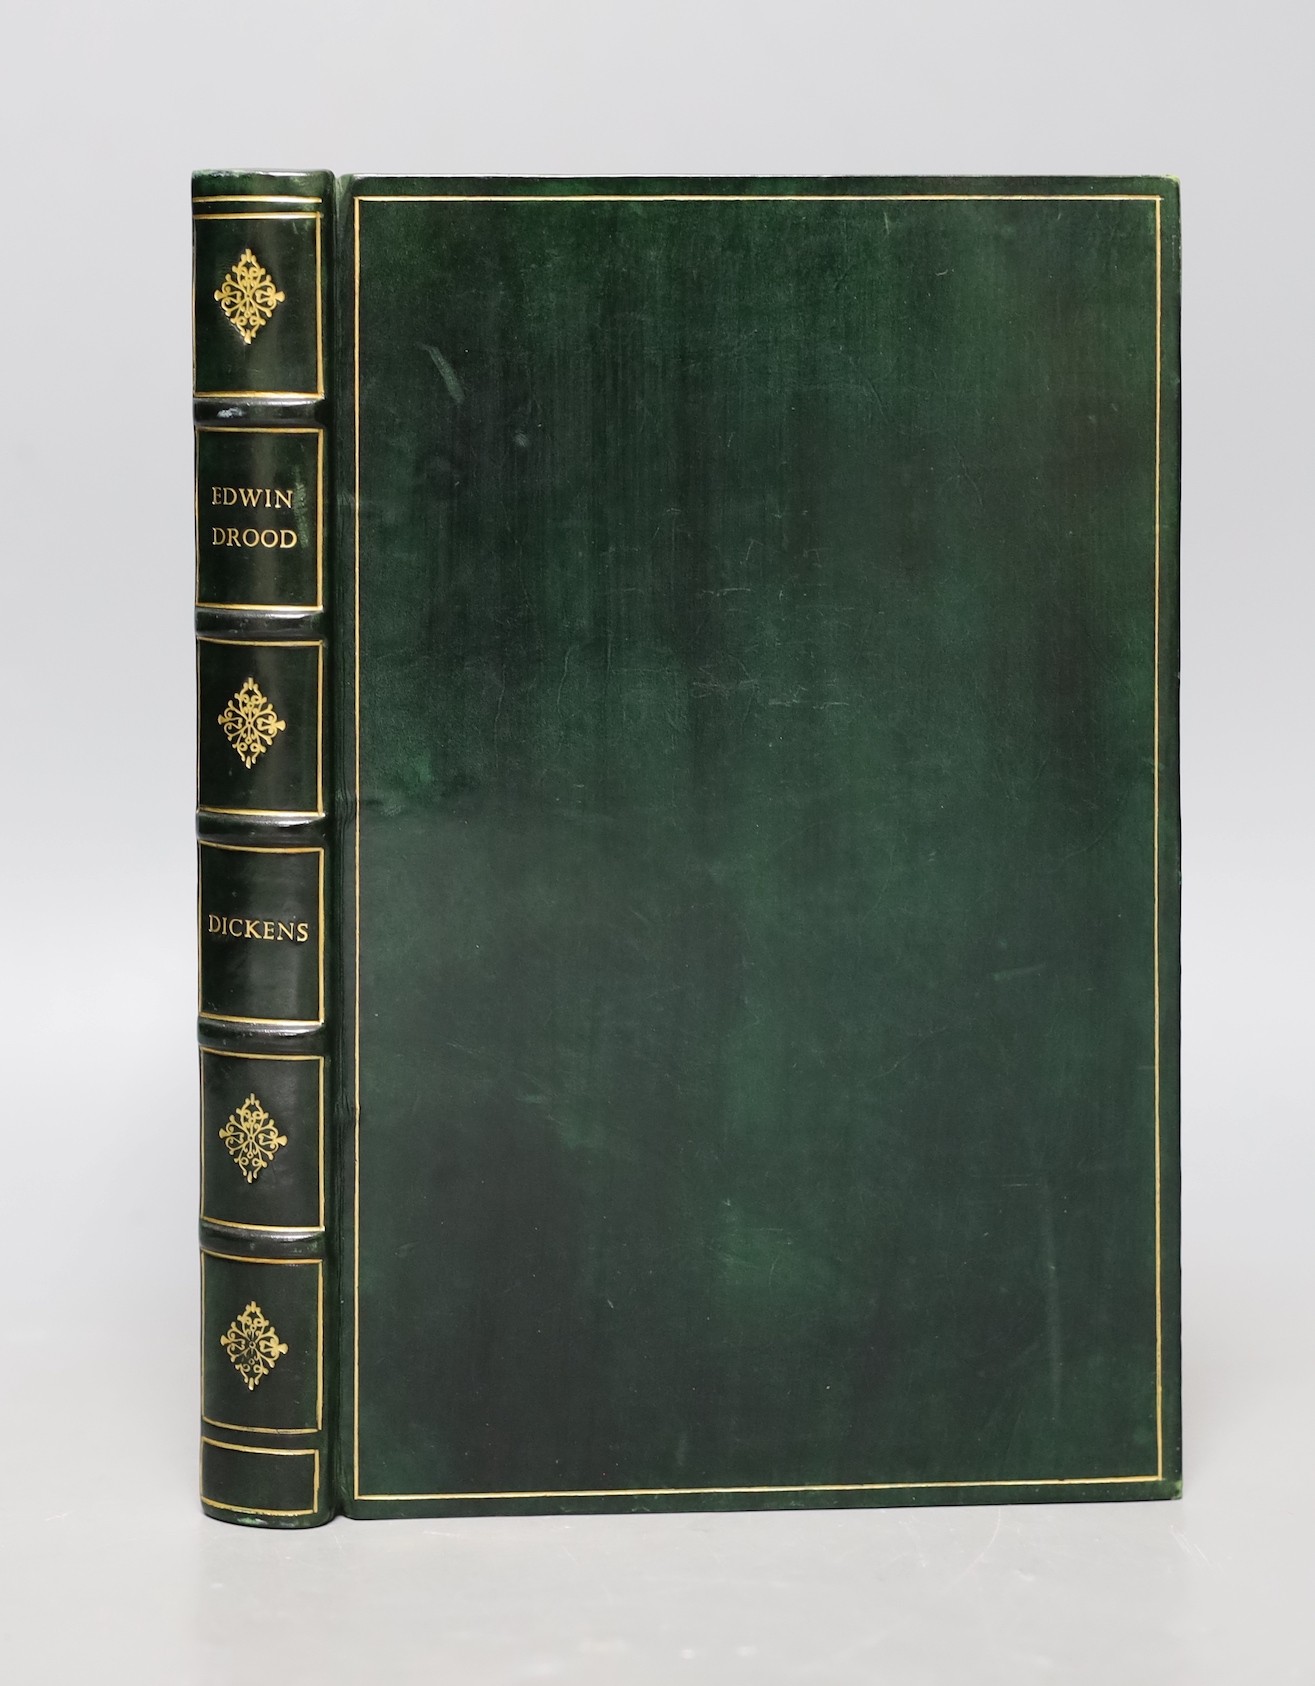 Dickens, Charles - The Mystery of Edwin Drood, 1st edition, rebound black calf gilt, Chapman and Hall, London, 1870